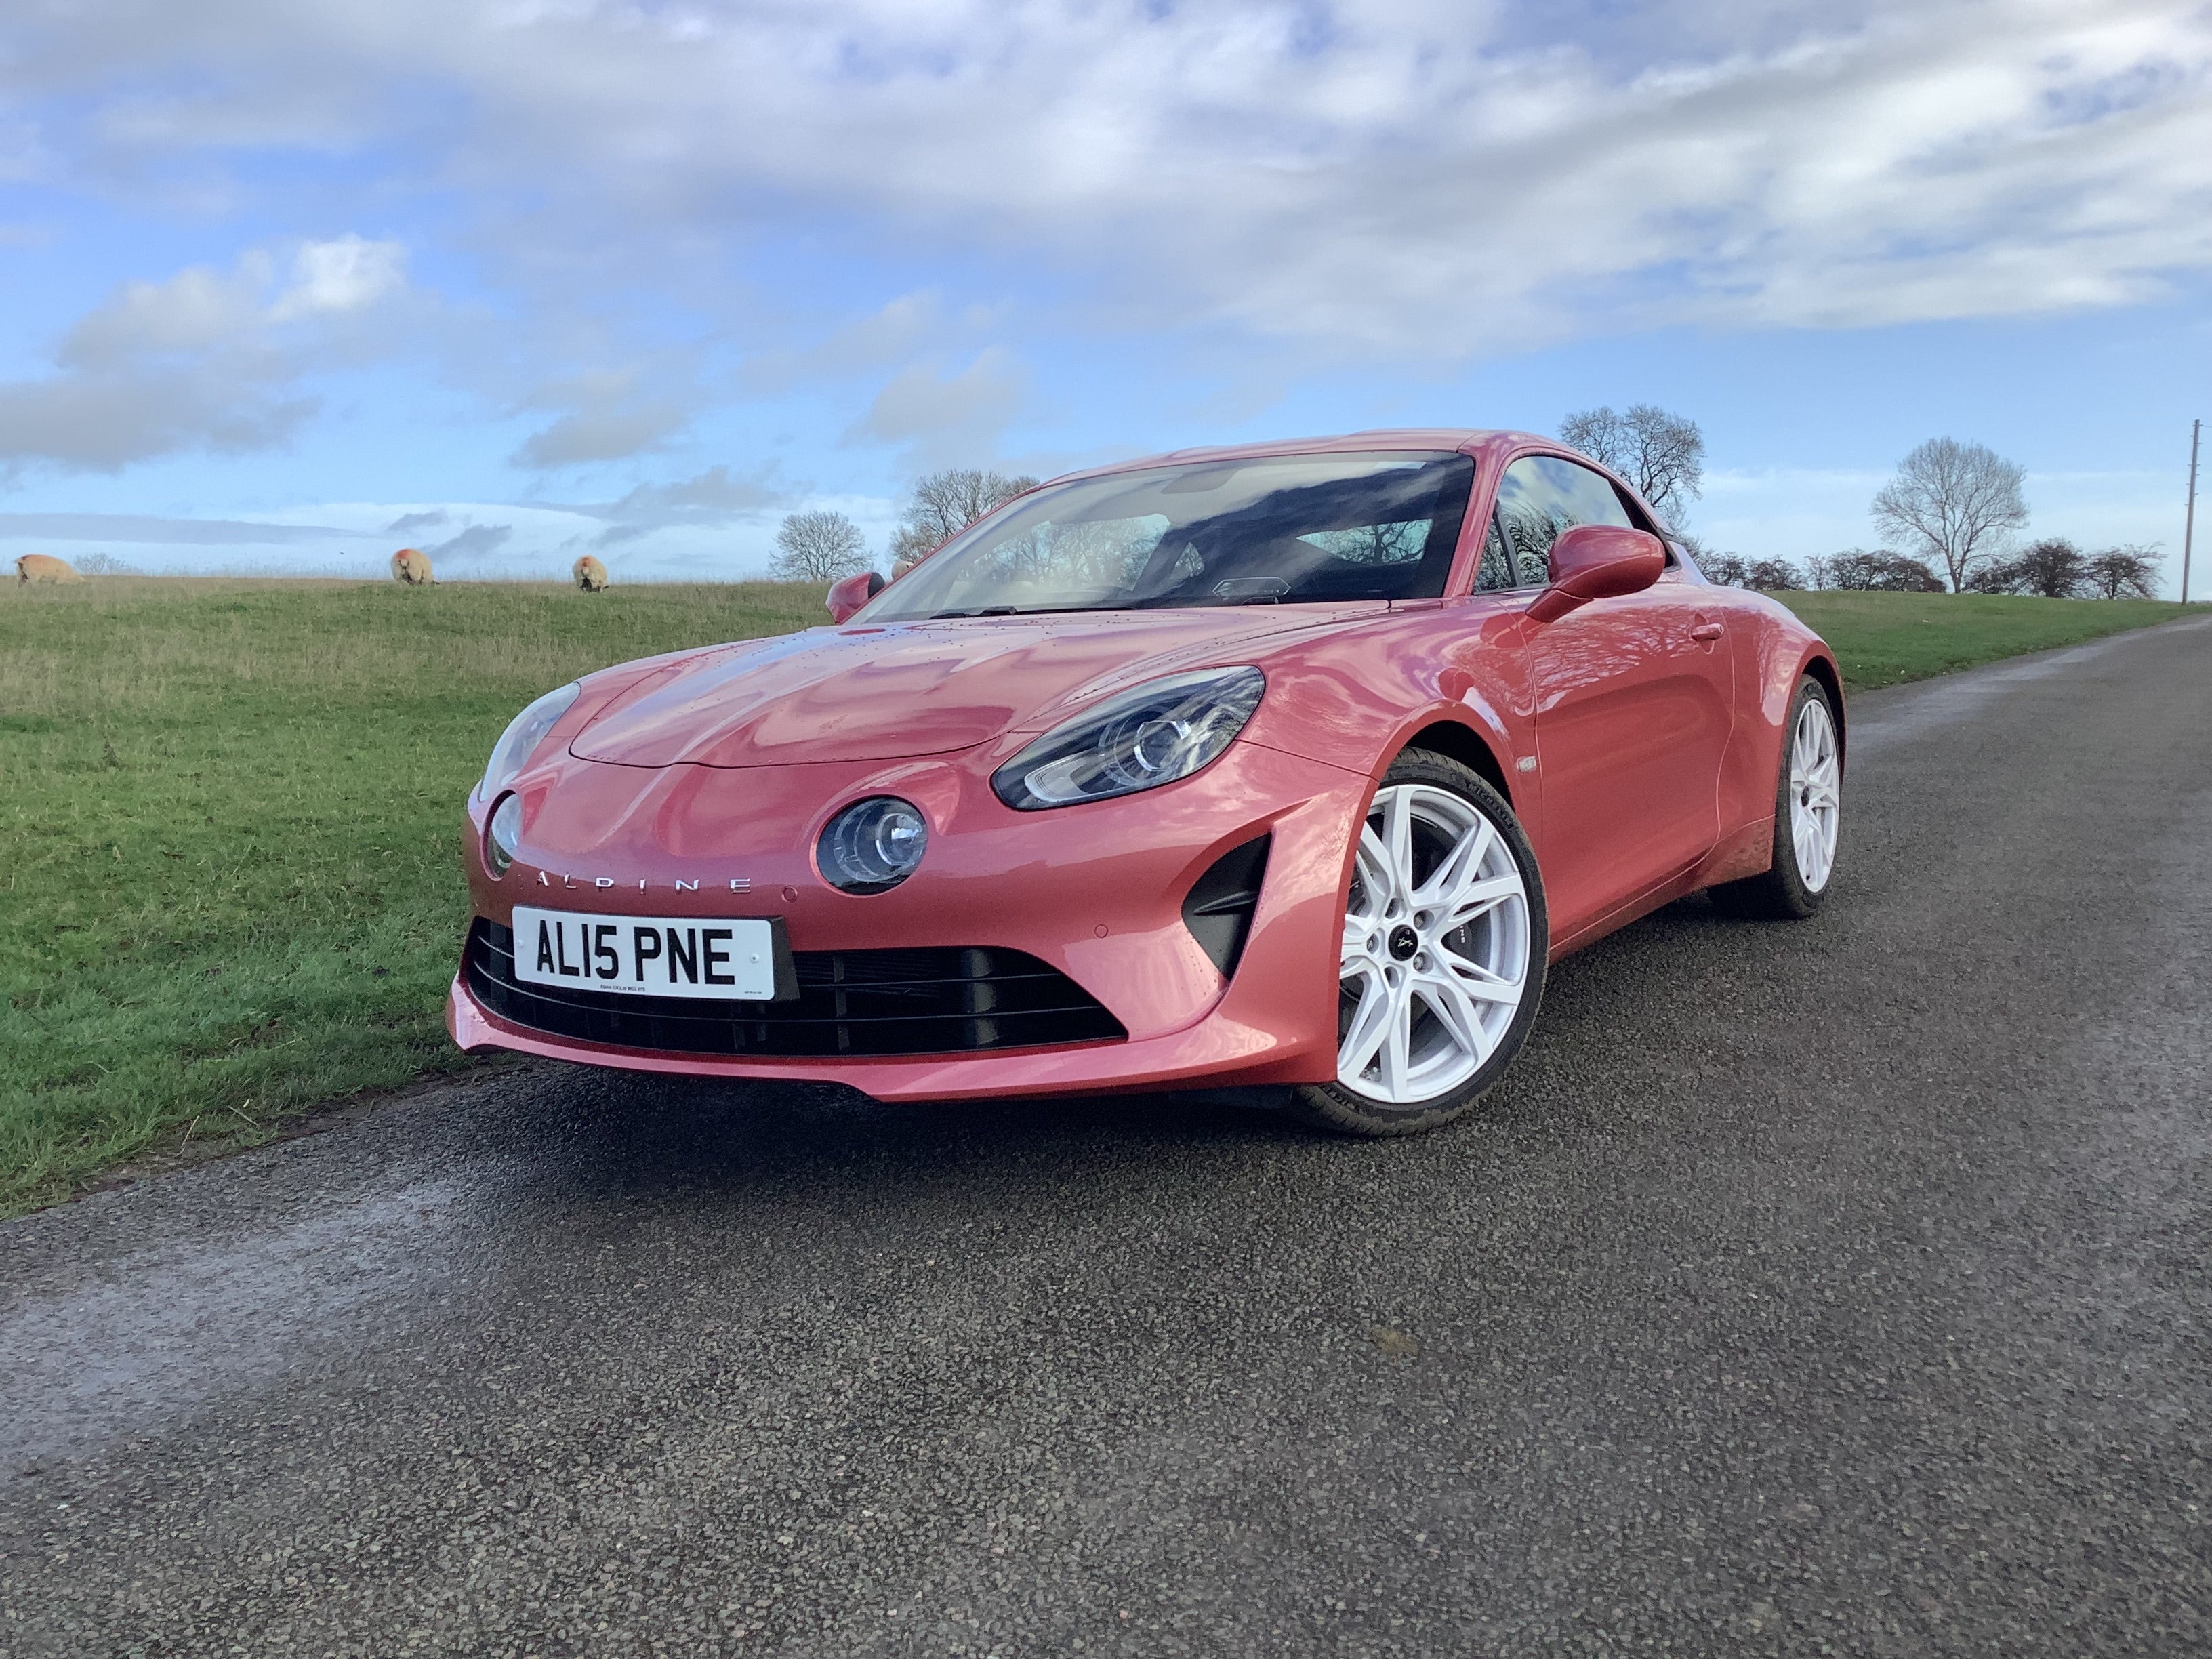 The A110 sits low and has a slim, racy bonnet line